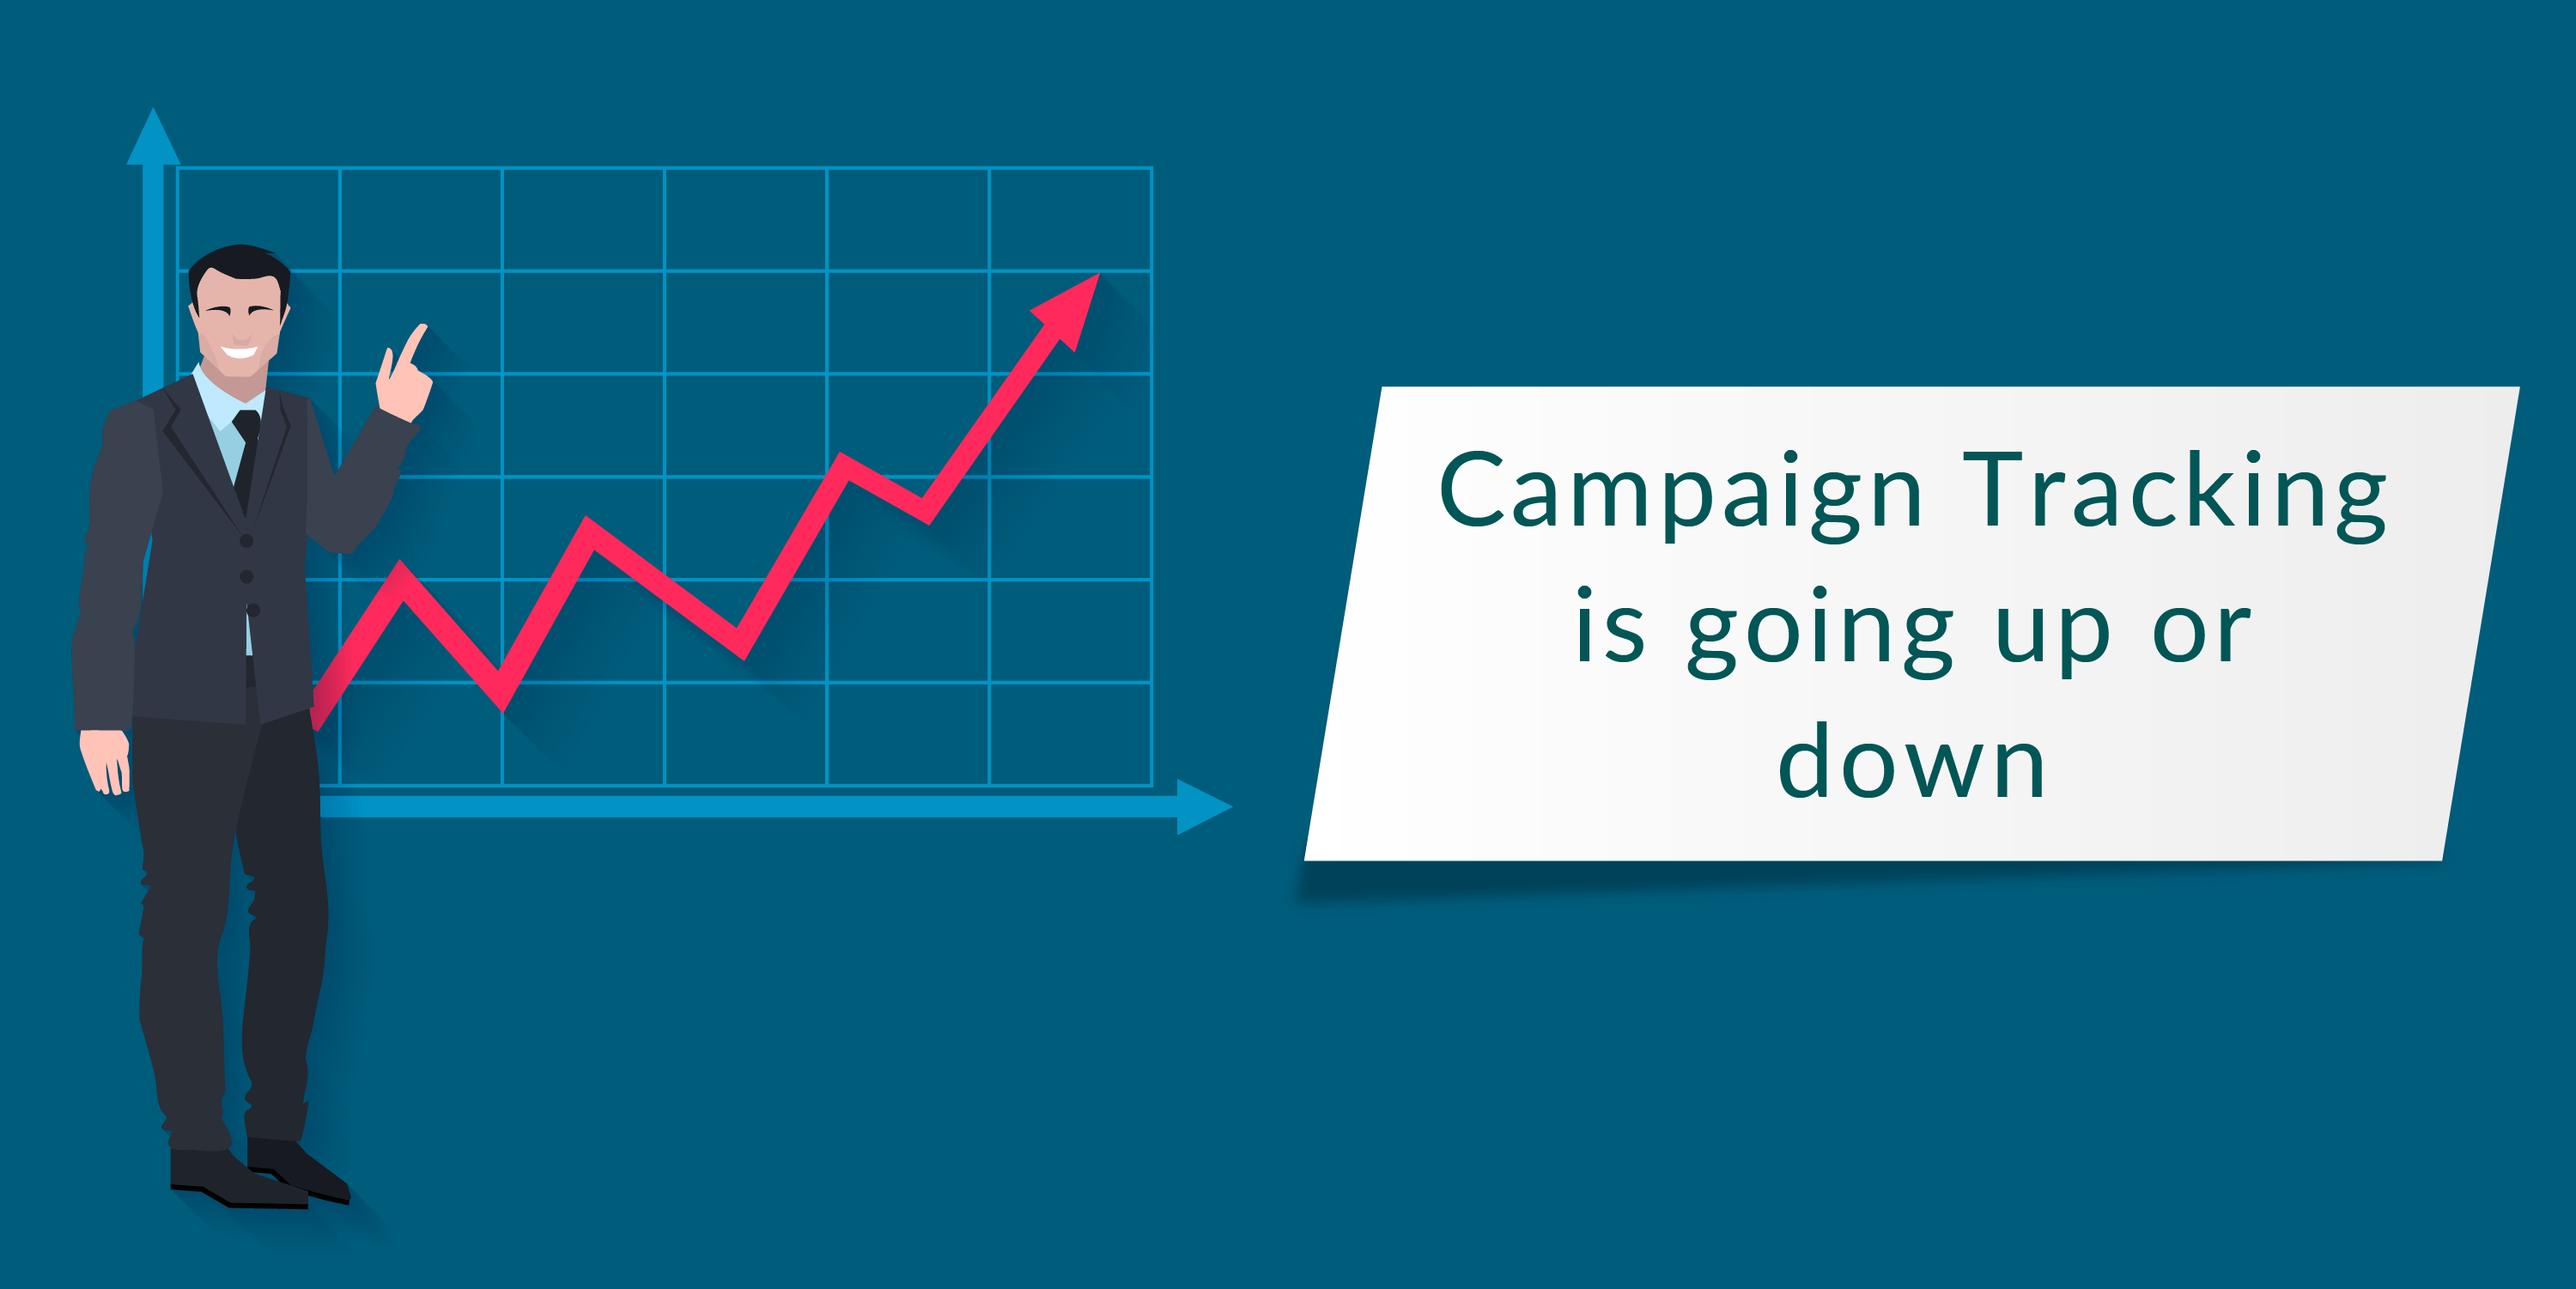 CAMPAIGN TRACKING IS GOING UP OR DOWN